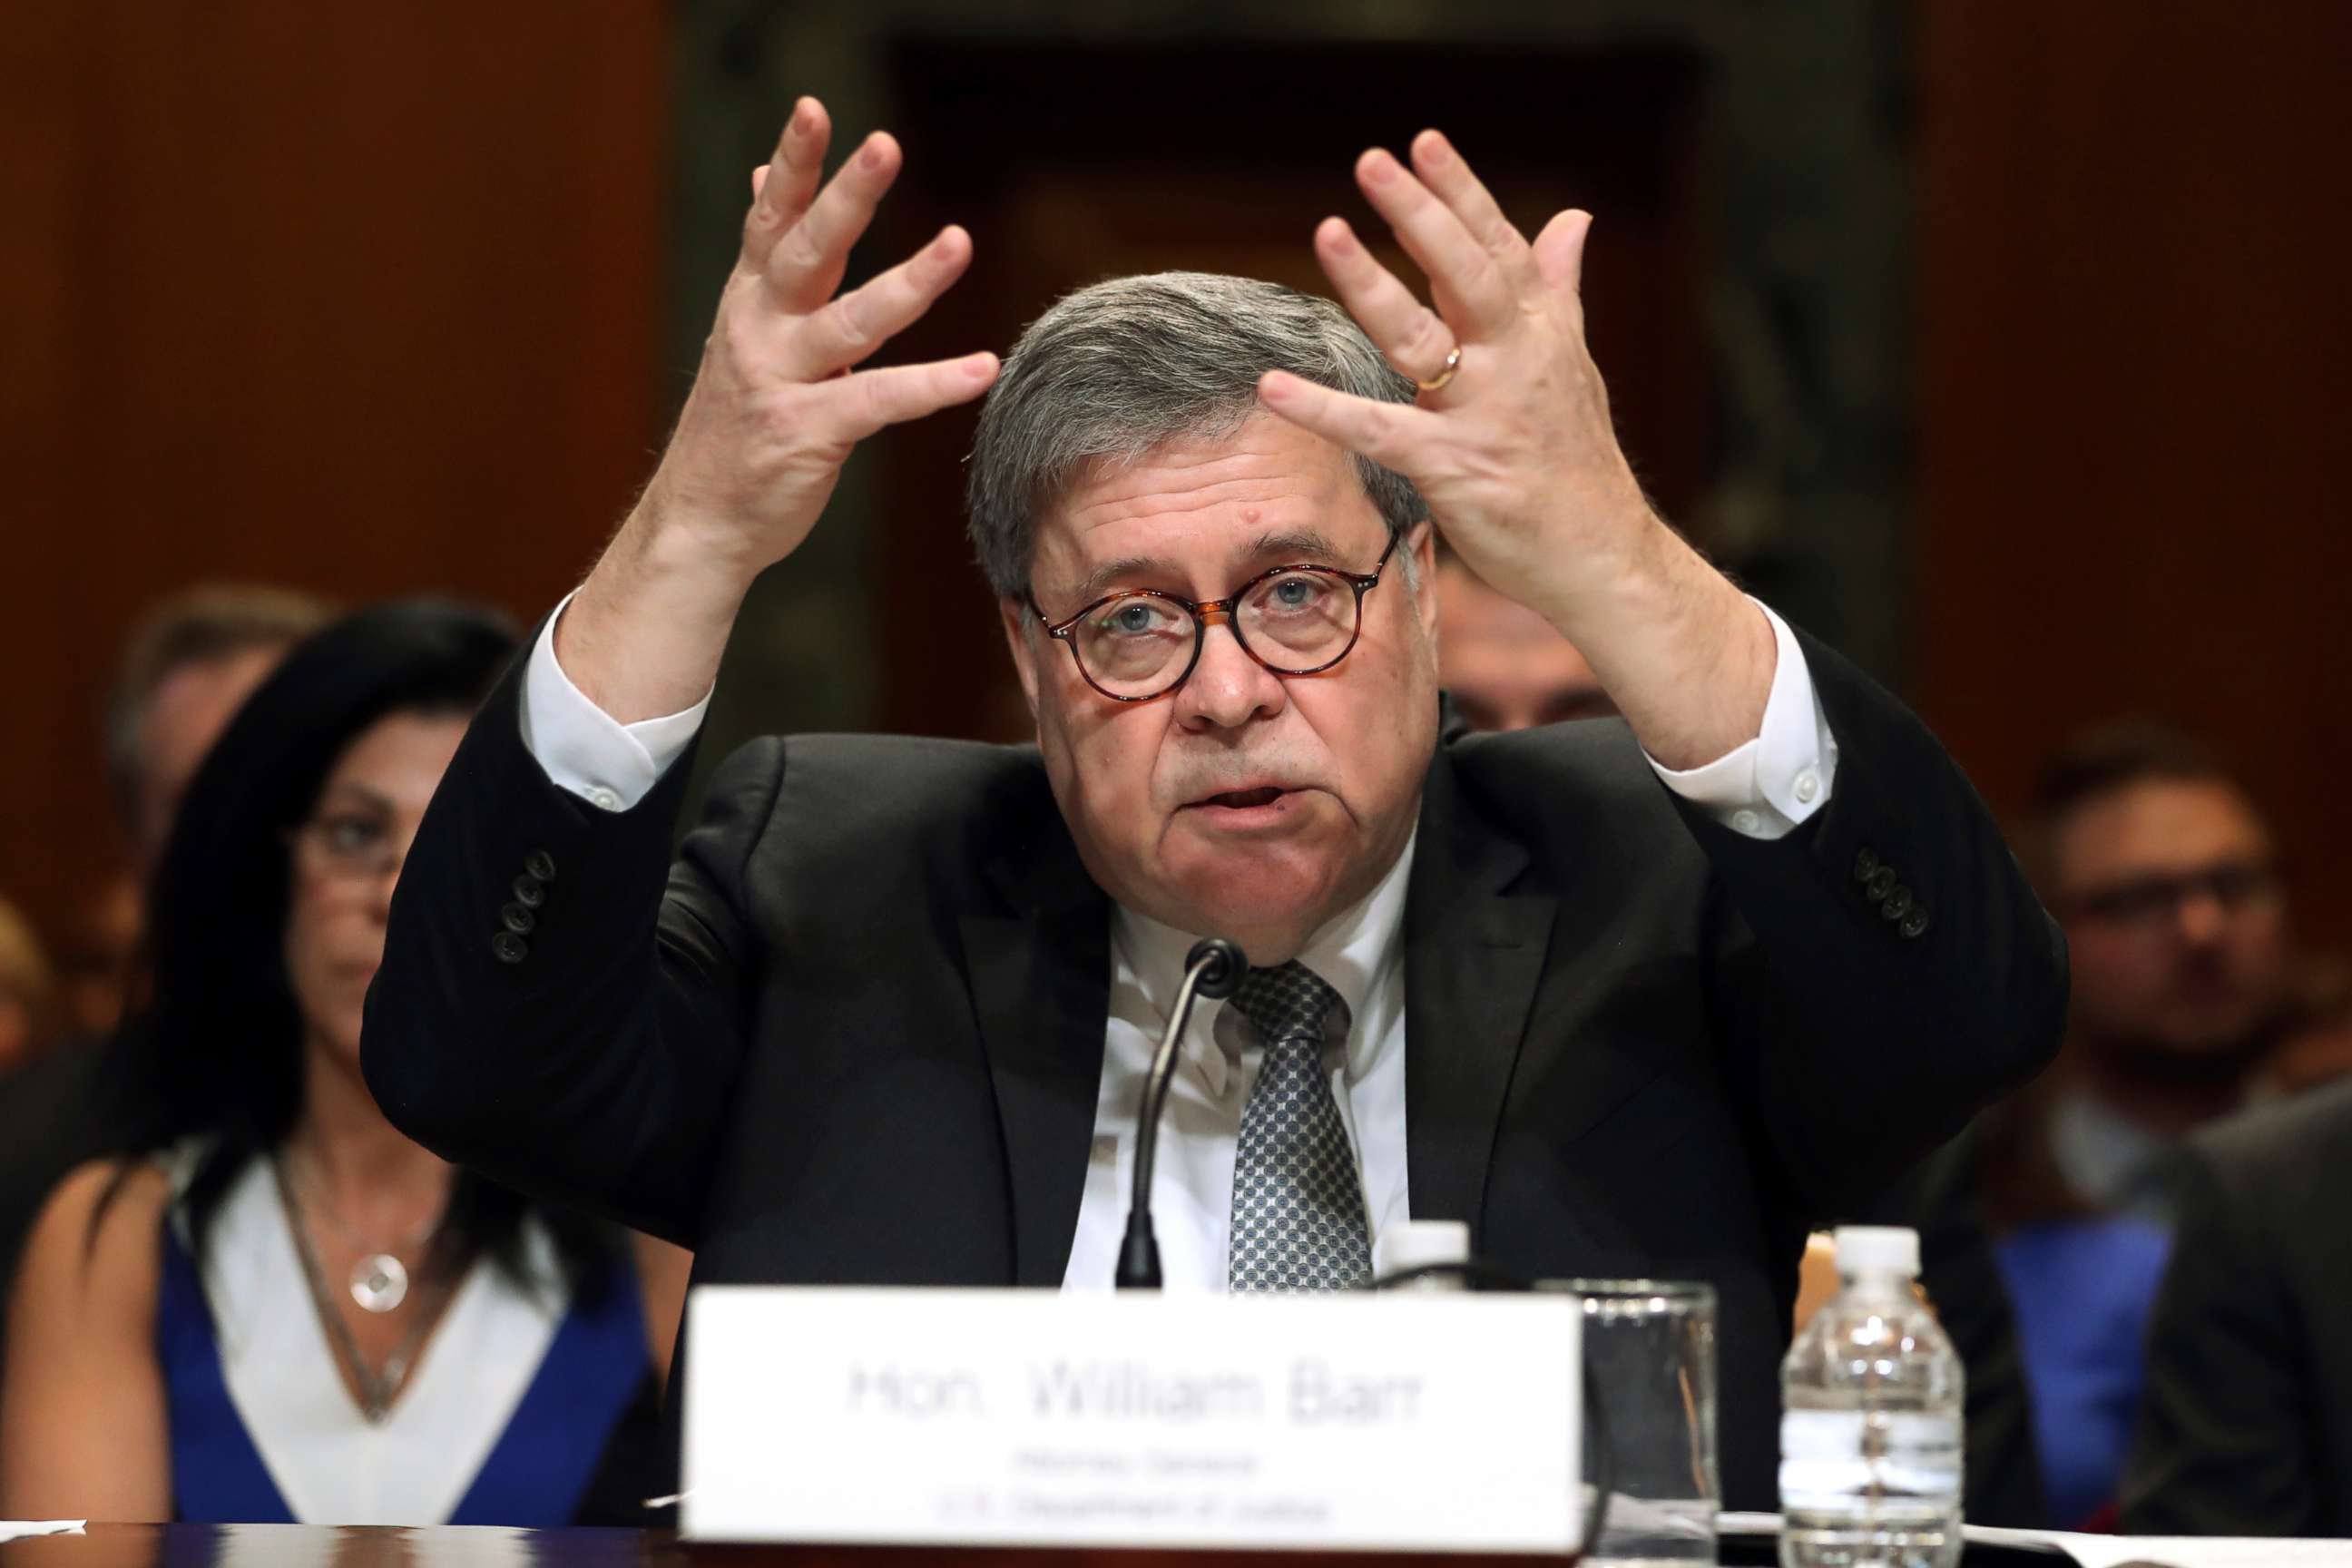 PHOTO: Attorney General William Barr gestures as he speaks before a Senate Appropriations subcommittee to make his Justice Department budget request, April 10, 2019, in Washington.